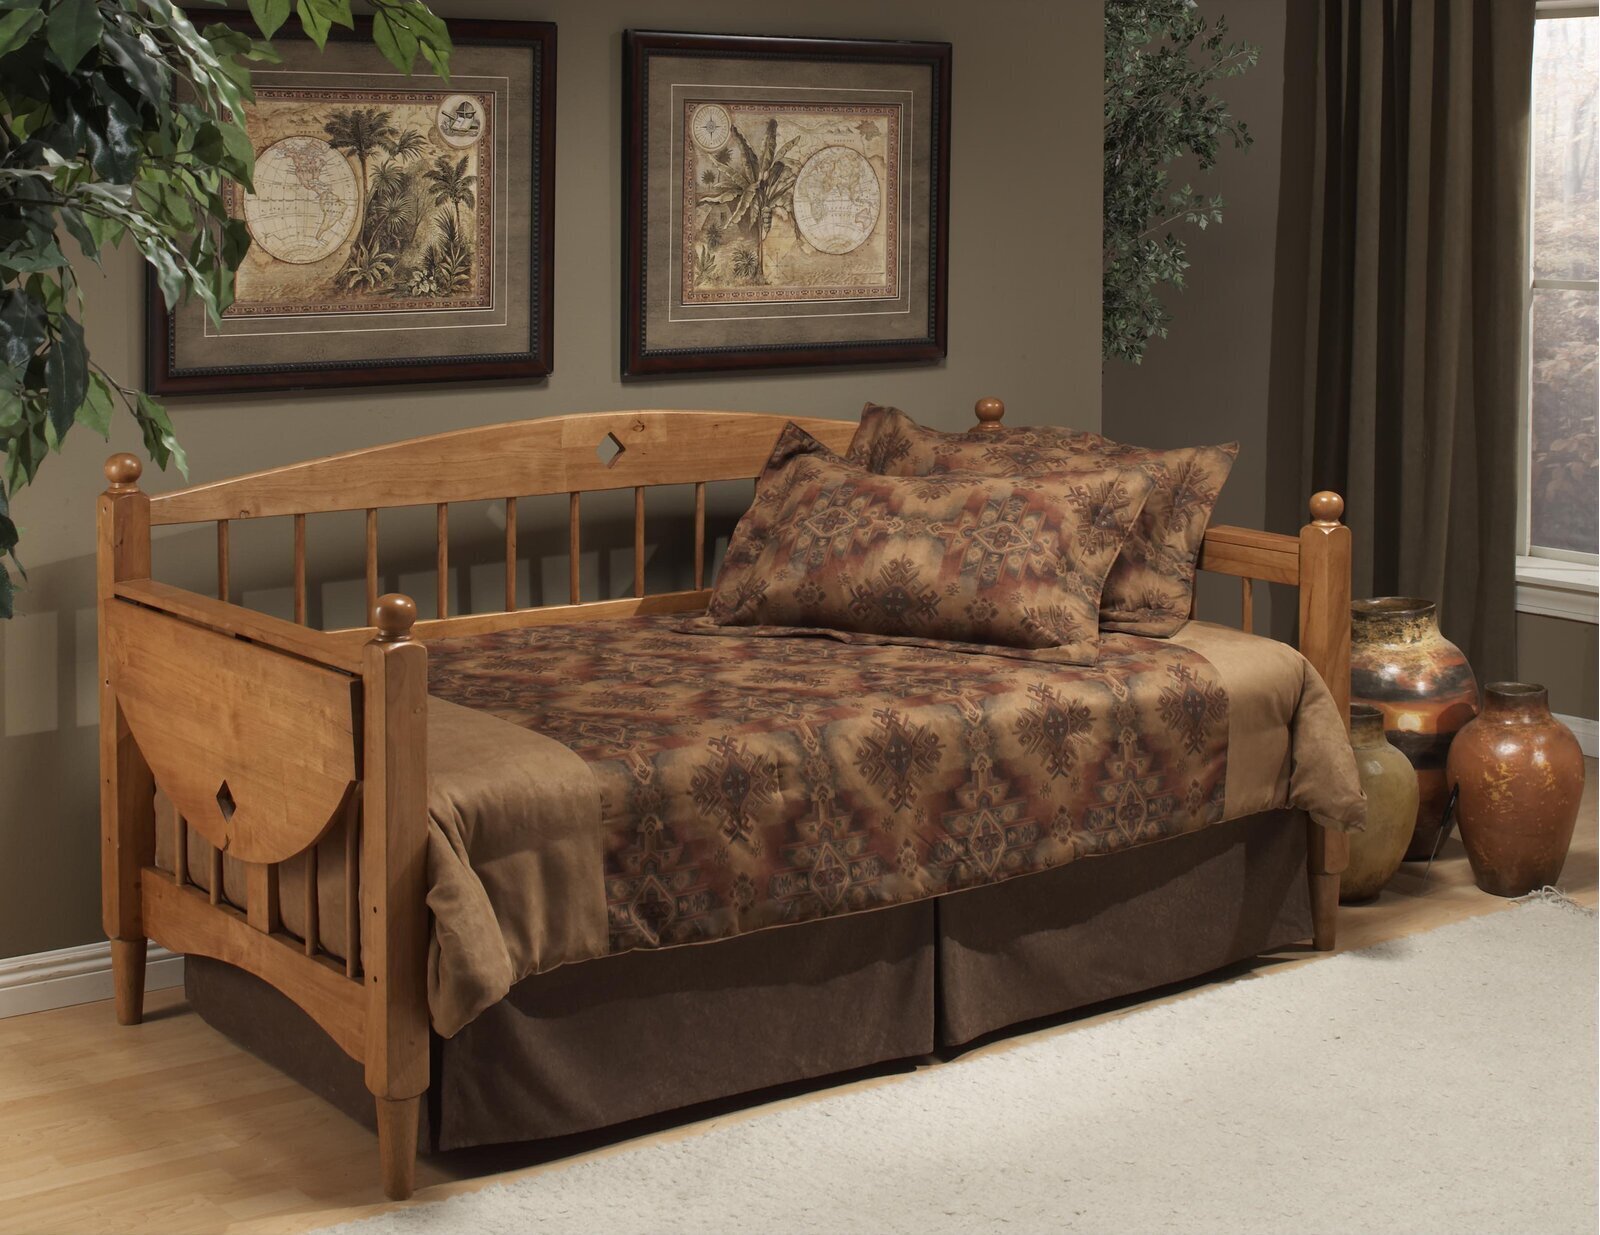 Traditional wooden day bed with side table